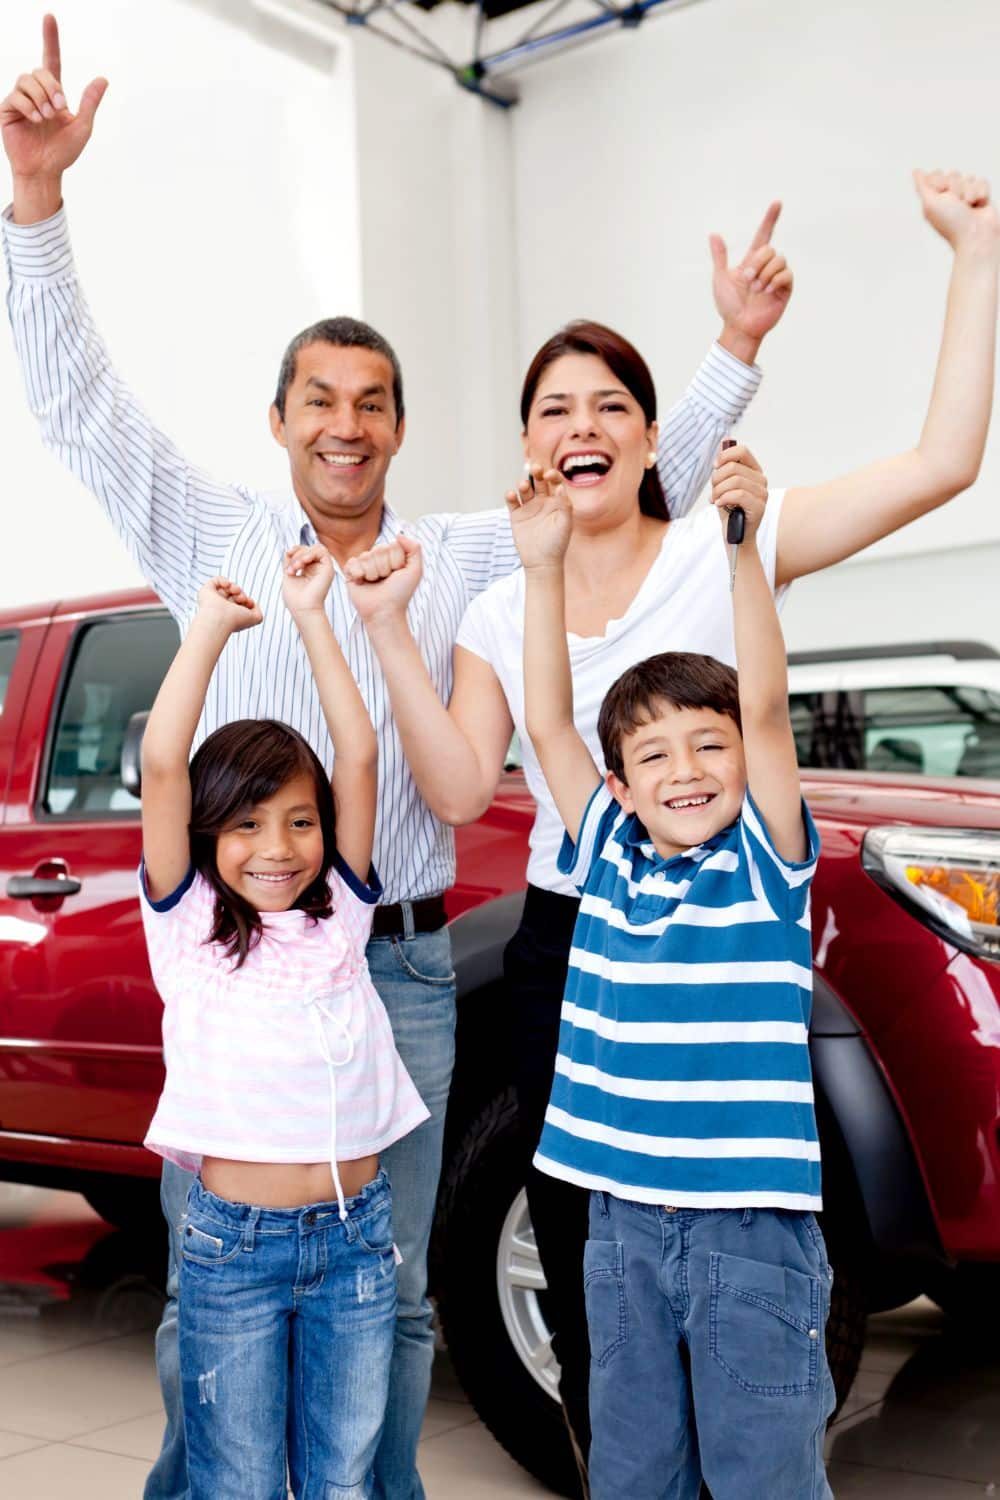 How To Find The Perfect Vehicle For Your Family